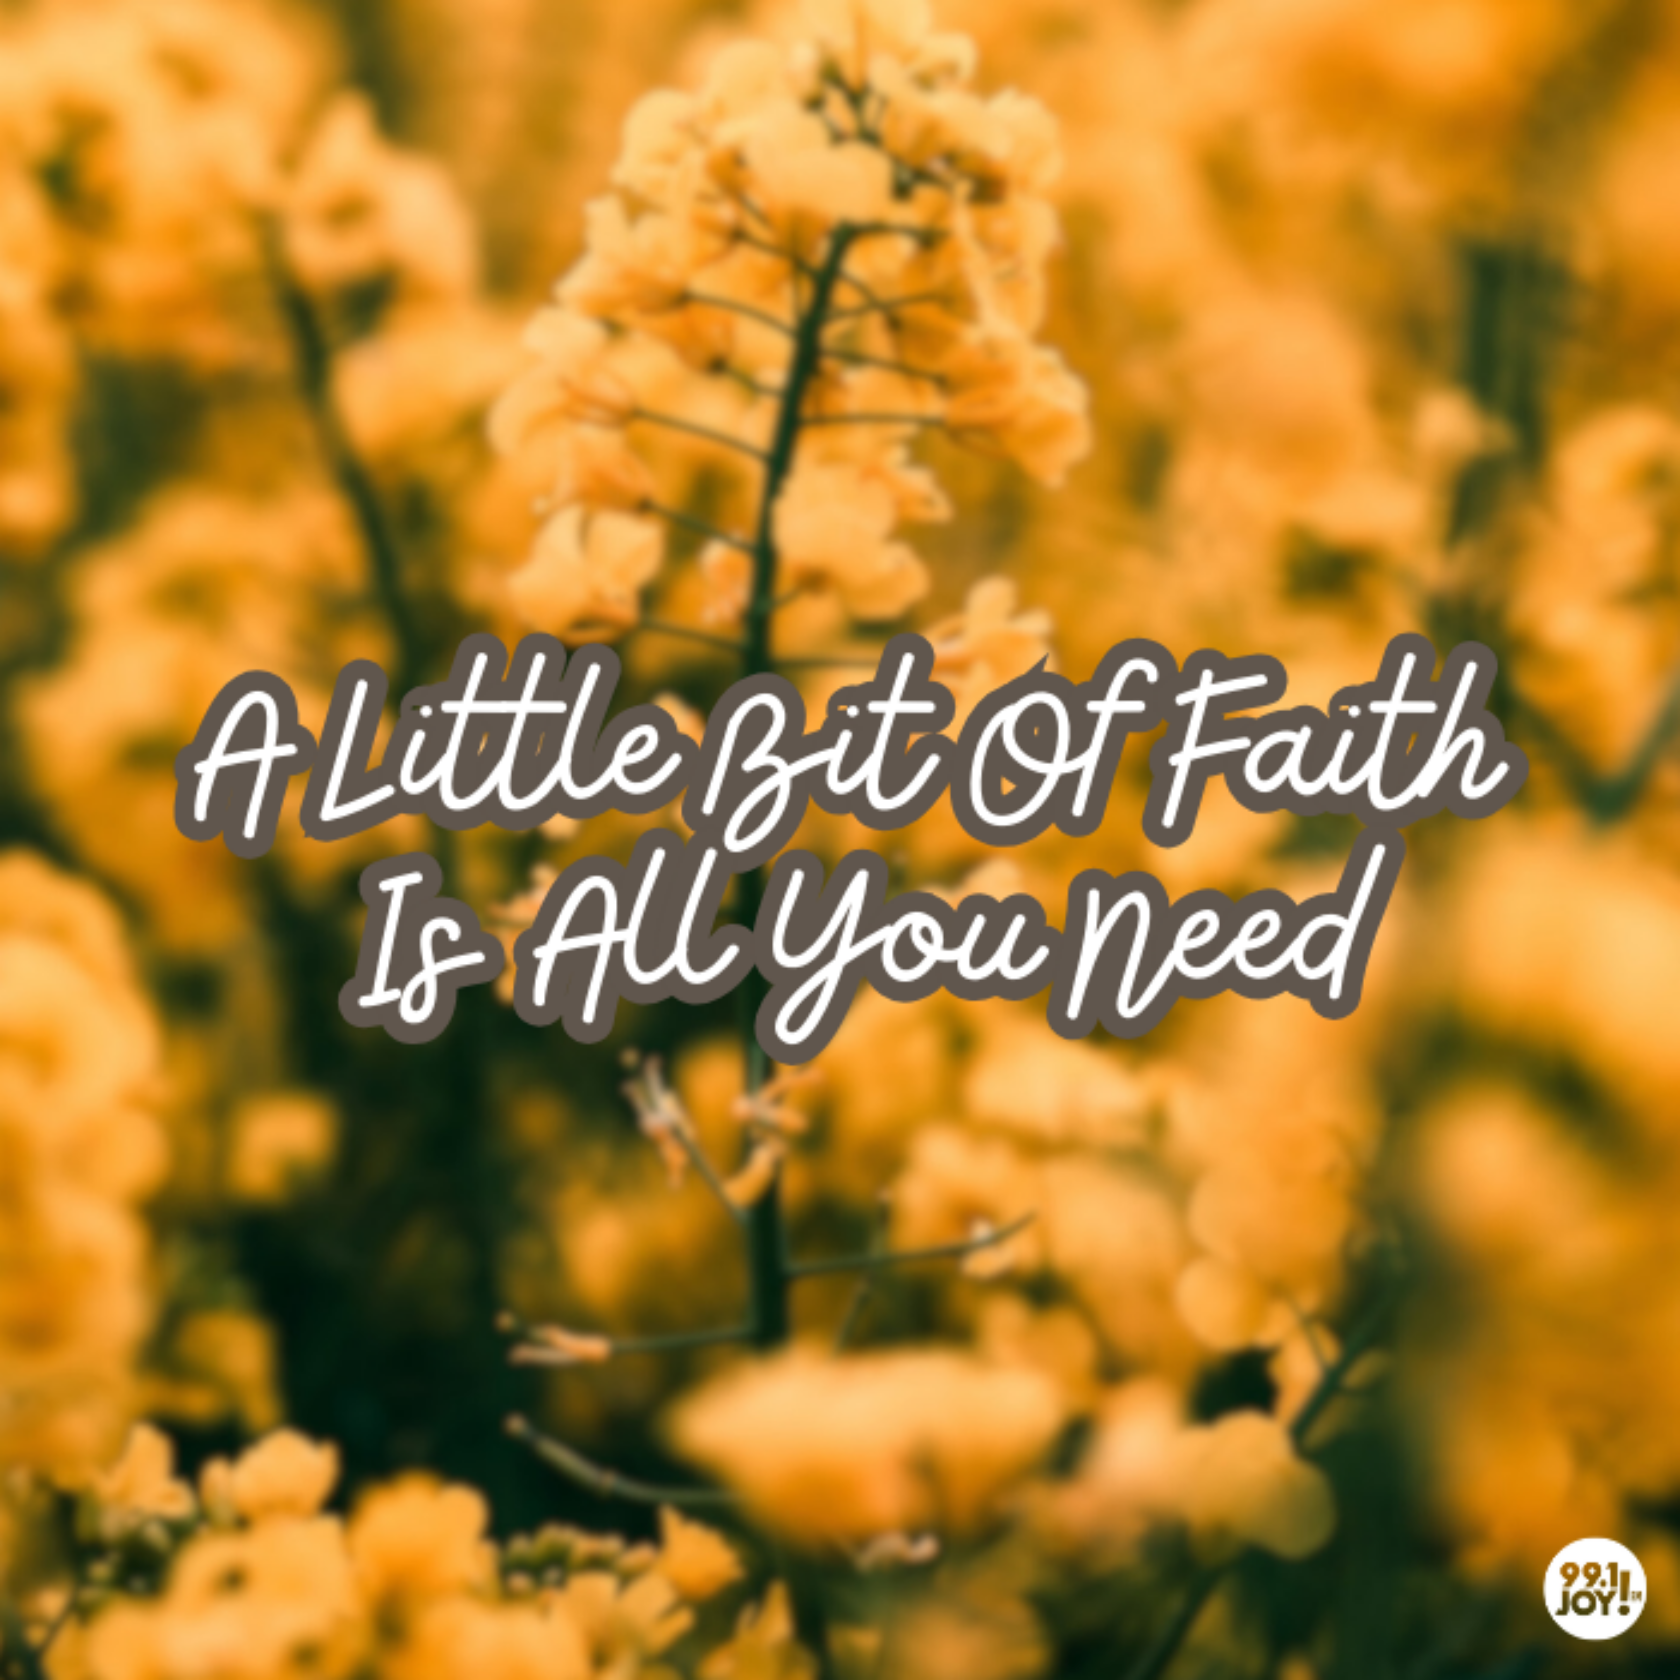 A Little Bit Of Faith Is All You Need